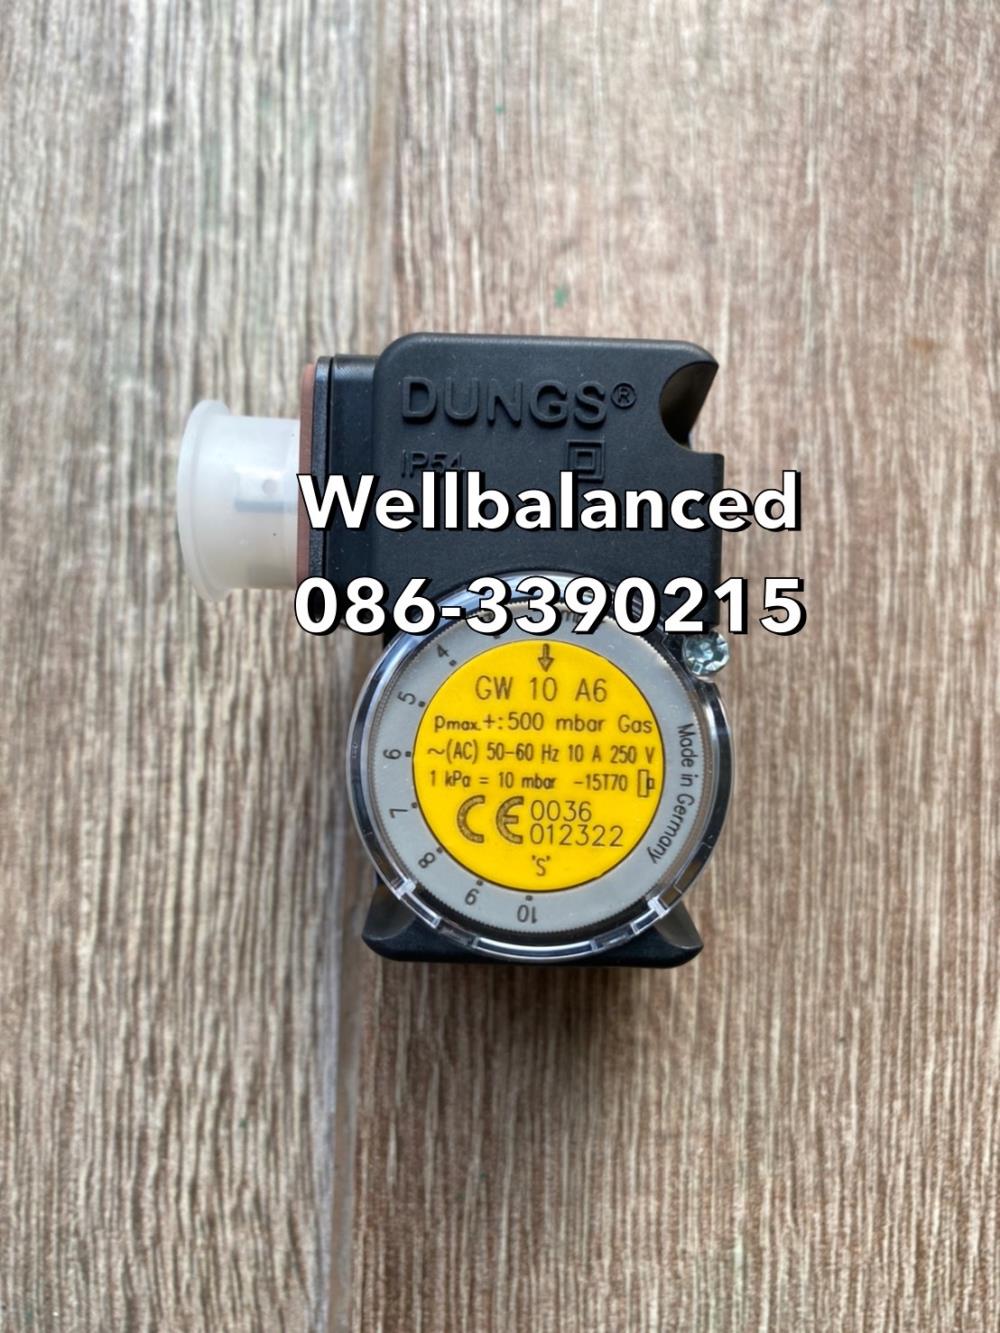 " DUNGS " Pressure Switch Model : GW 10 A6," DUNGS " Pressure Switch Model : GW 10 A6," DUNGS " Pressure Switch Model : GW 10 A6,Instruments and Controls/Switches